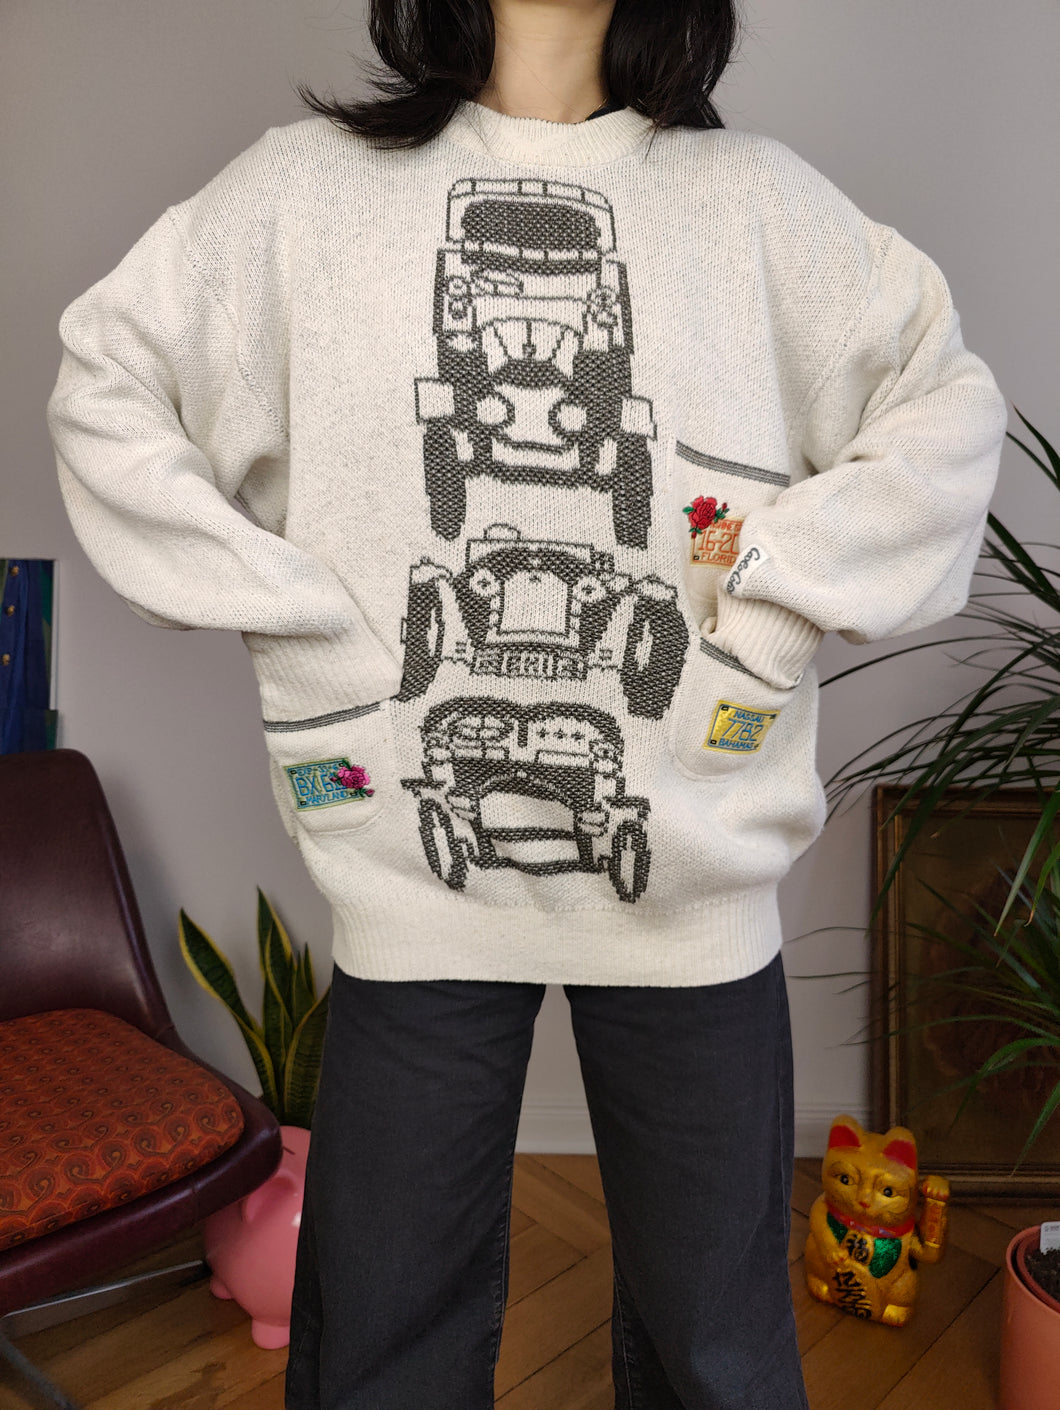 Vintage Carlo Colucci designer car made in West Germany sweater knit white pullover jumper women men unisex L